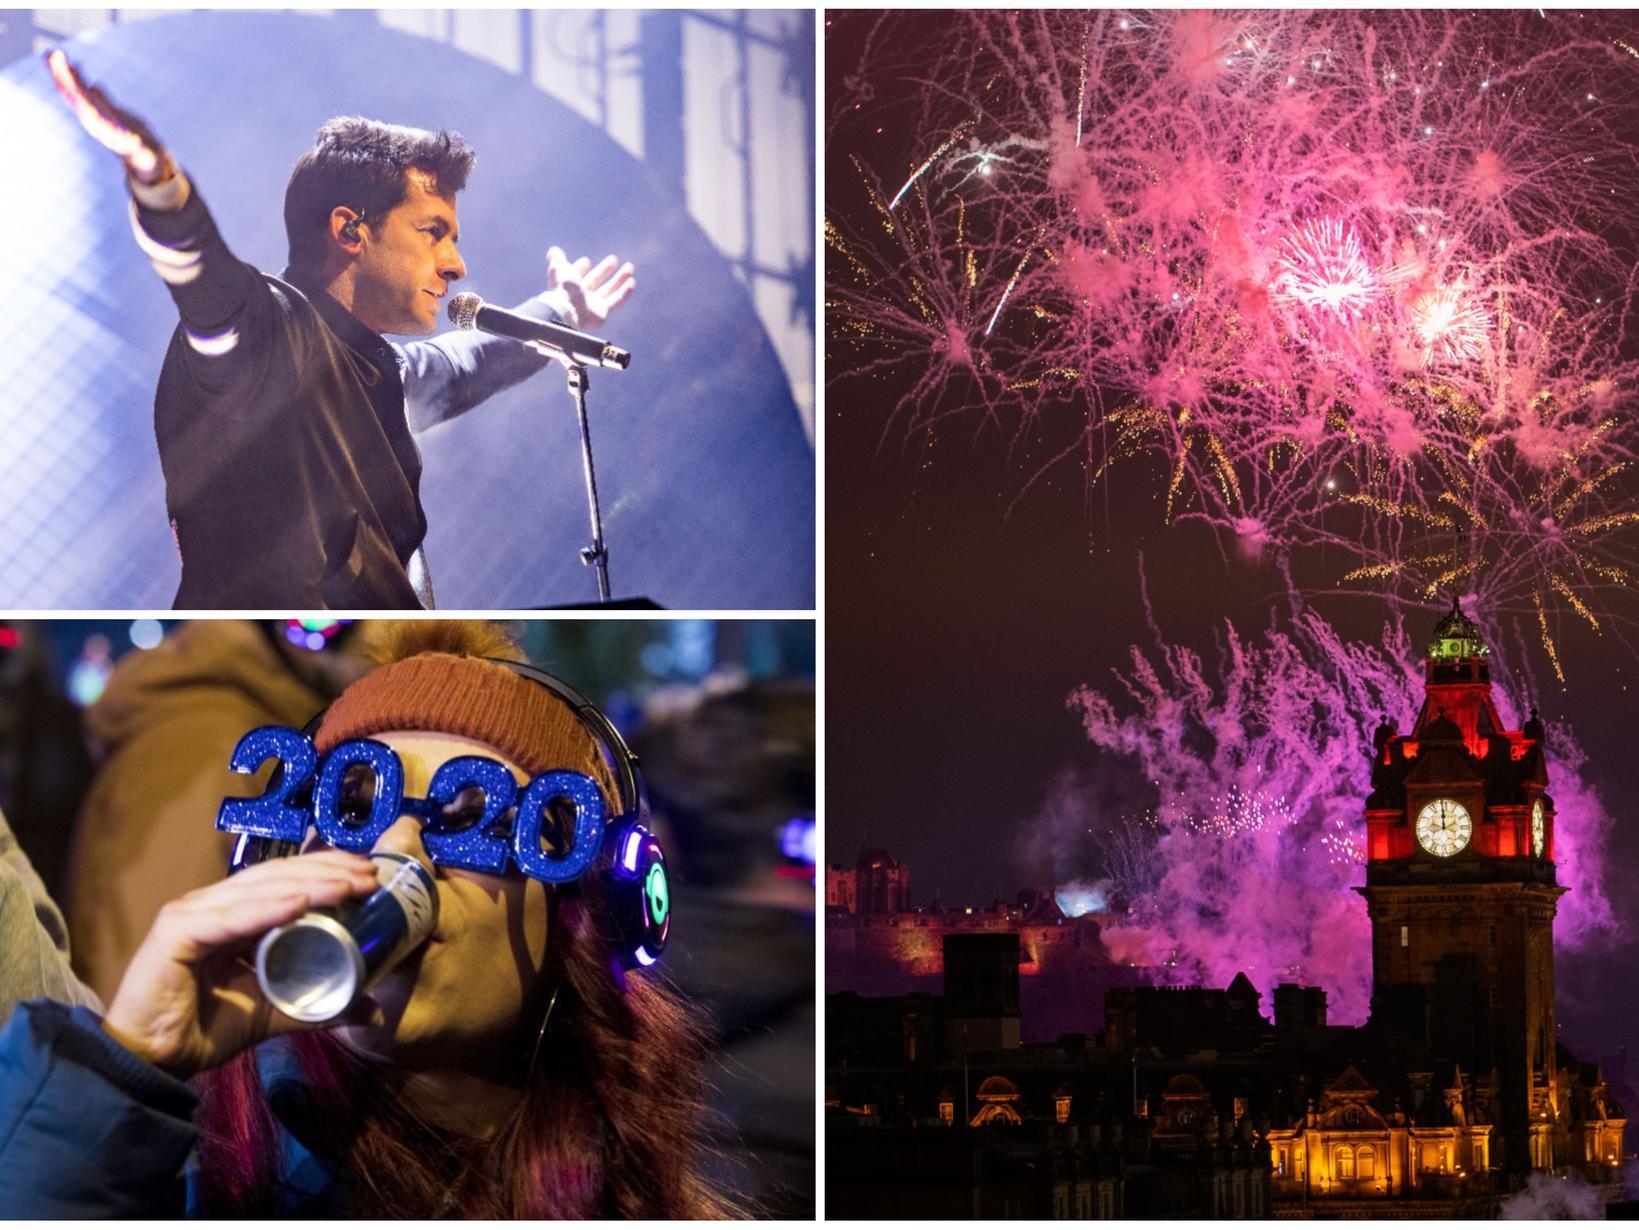 Stunning pictures show how Edinburgh celebrated Hogmanay and brought in 2020